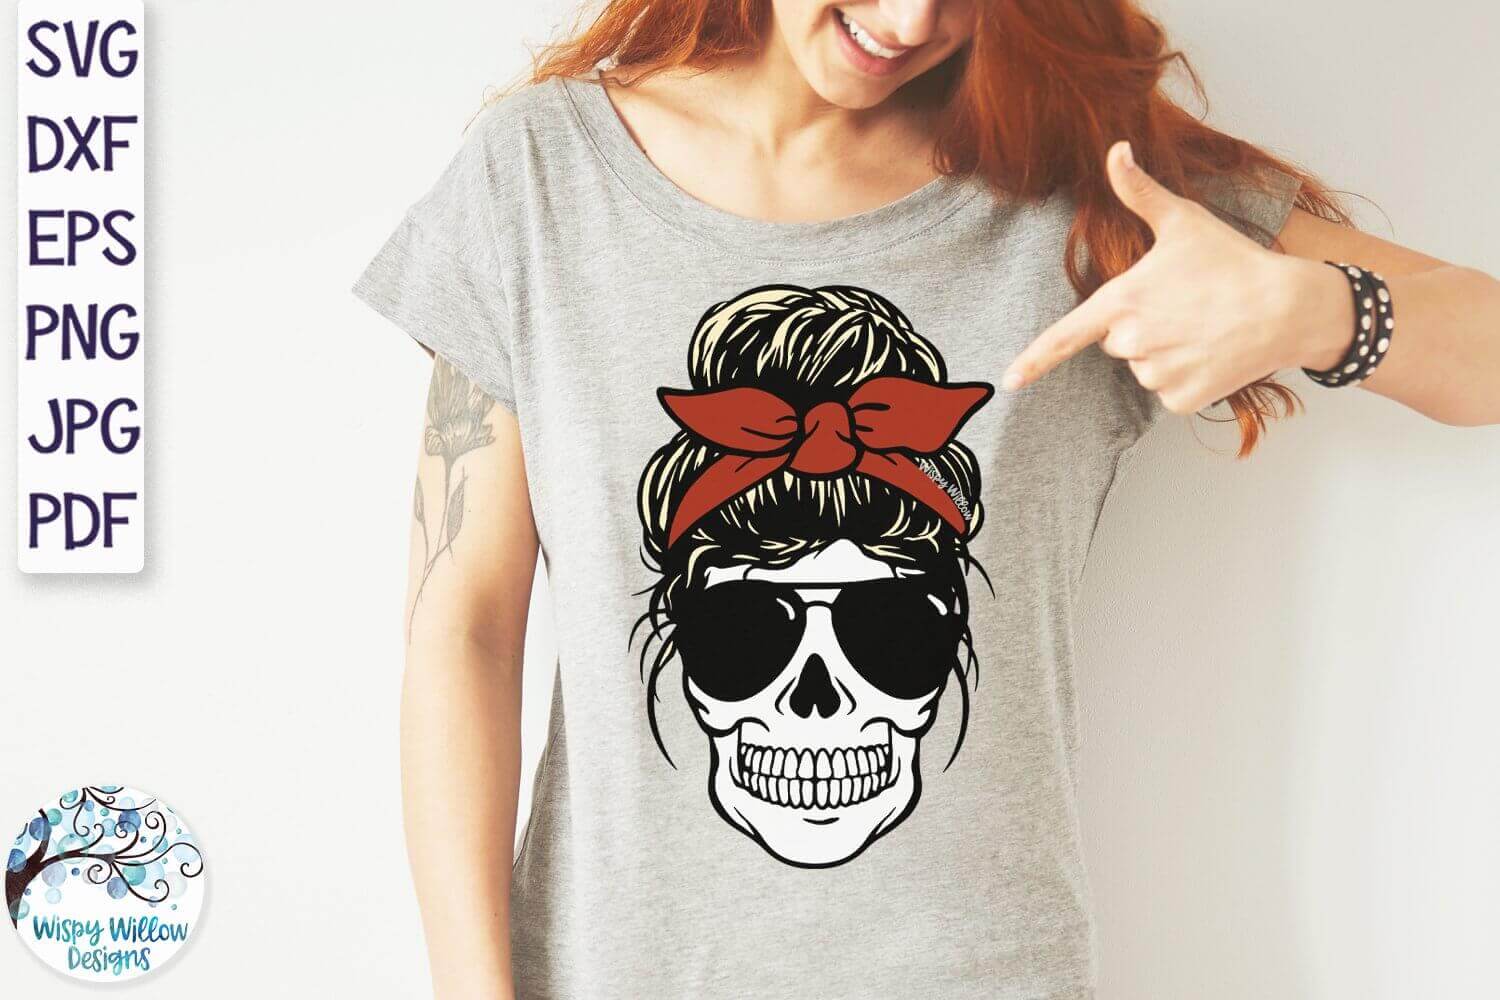 Messy Bun Skull Mom with Red Kerchief on the Head on the T-shirt.